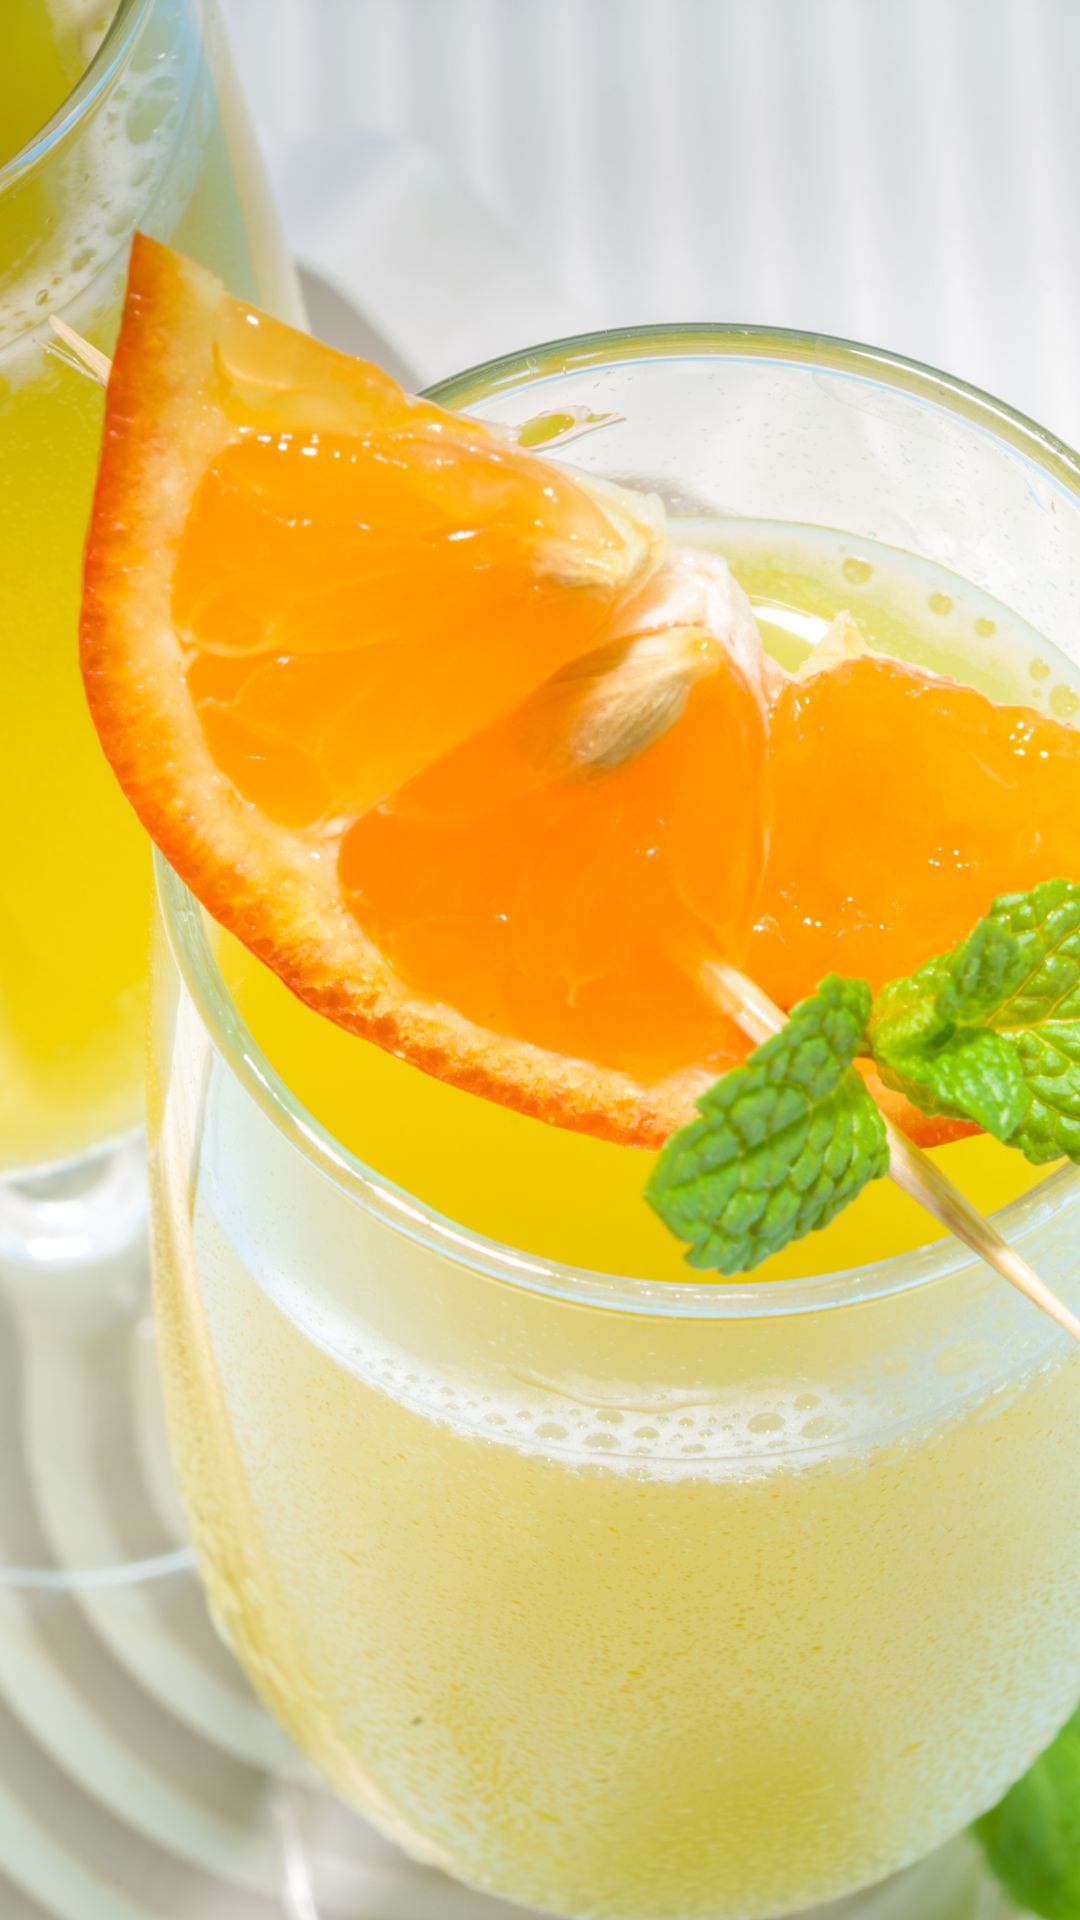 A March madness slam dunk cocktail with orange slices and mint in a glass